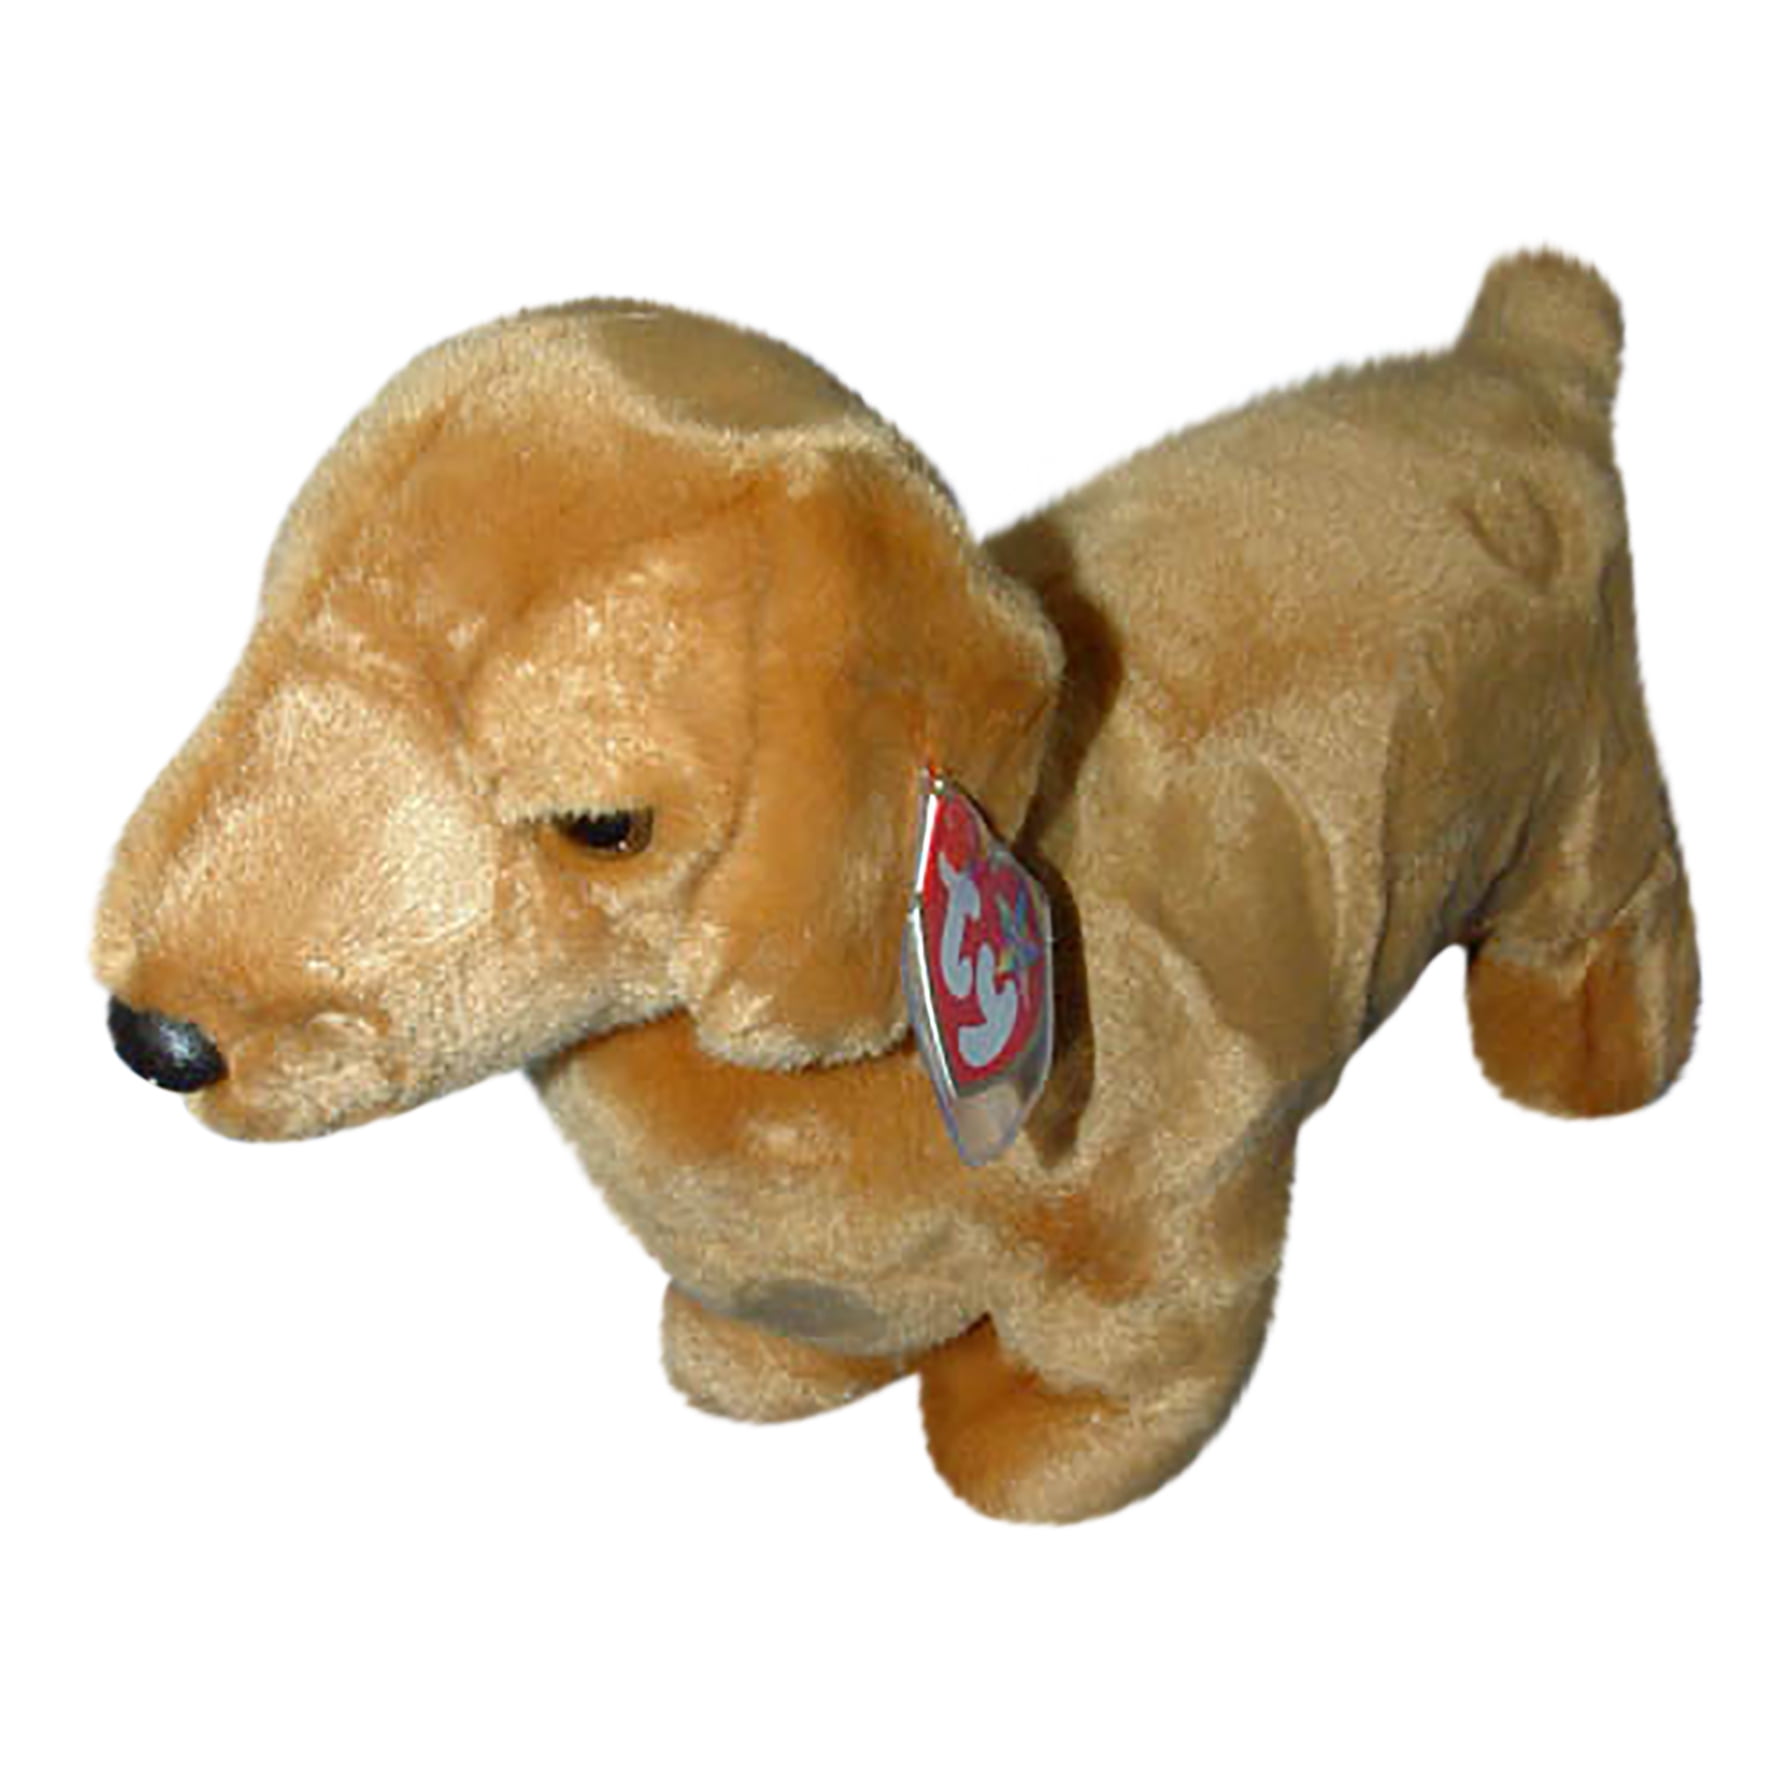 Ty 2 Frank The Dog Beanie Babies 2009 & 2012 Big and Normal Eyed Dachshund for sale online 